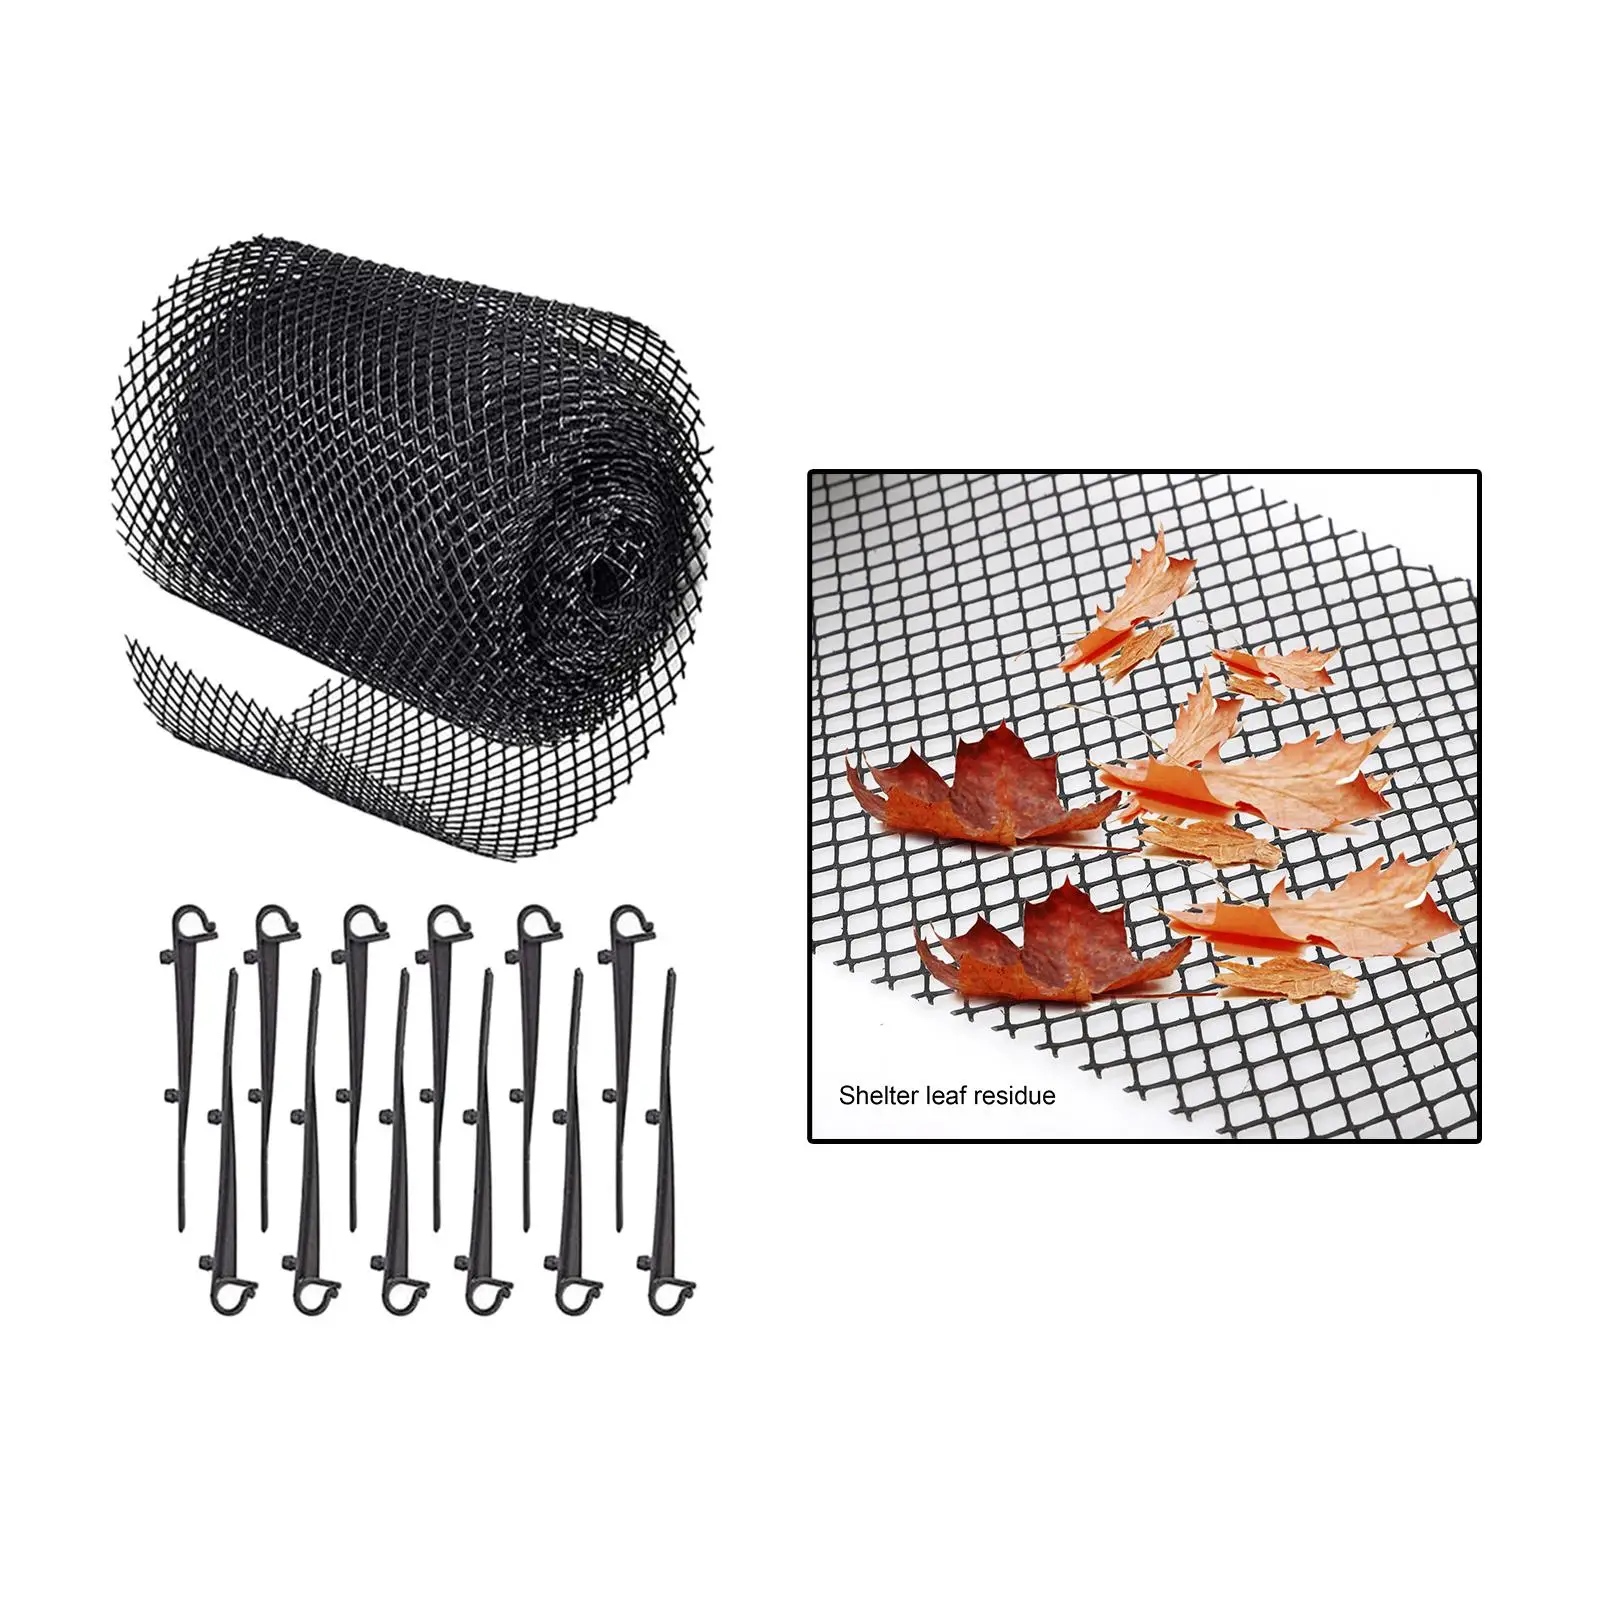 Leaf Guard Mesh Cleaning Tool Anti Clogging Flexible Roof Leaf Guard Mesh Strainer for Park Home Balcony Outdoor Accessories